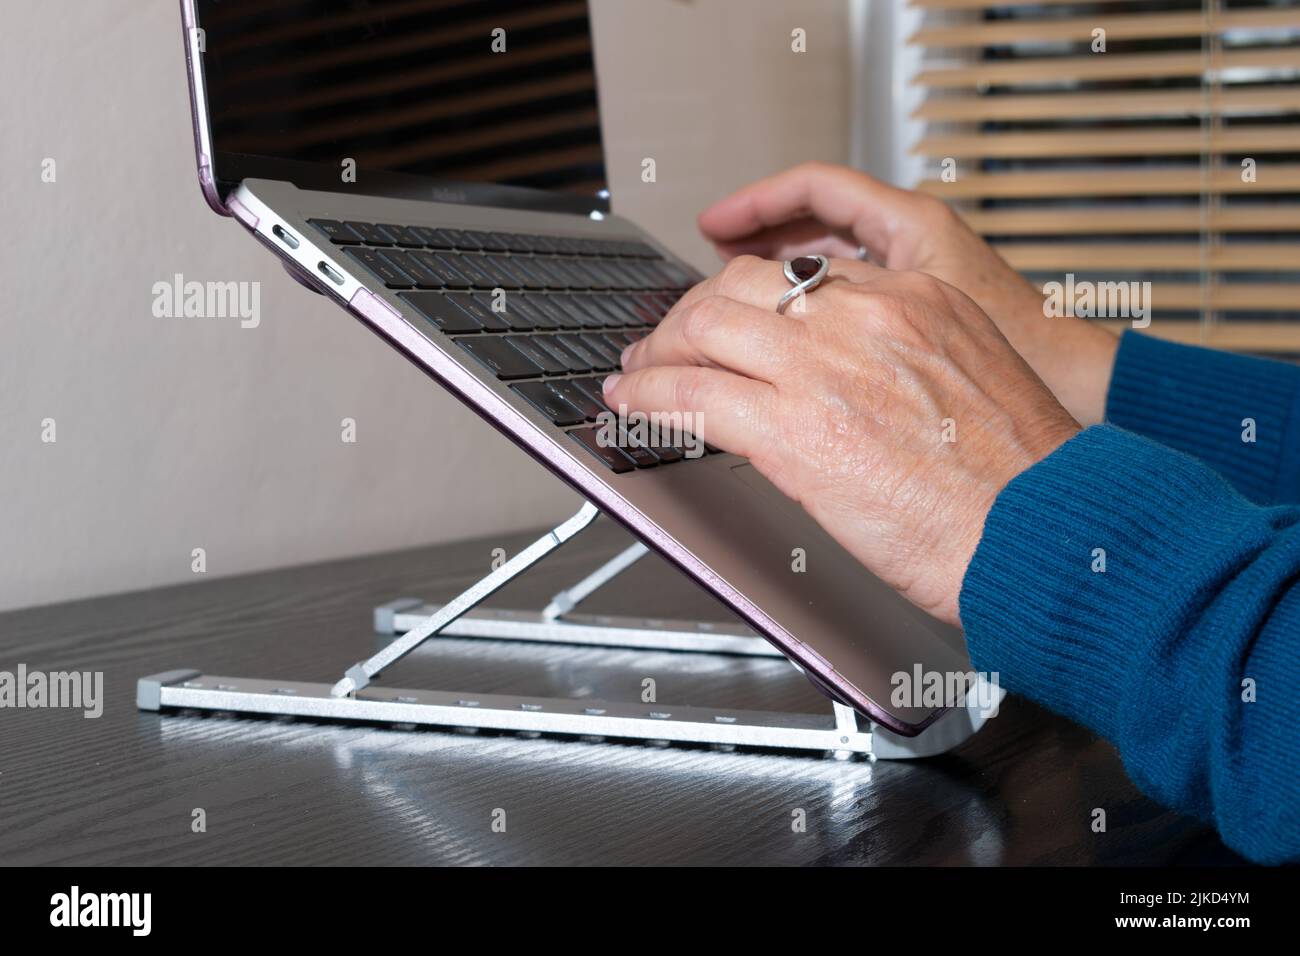 Laptop stand for wrist protection and neck posture. Foldable adjustable stand with hands typing on laptop screen raised to eye height in home office. Stock Photo